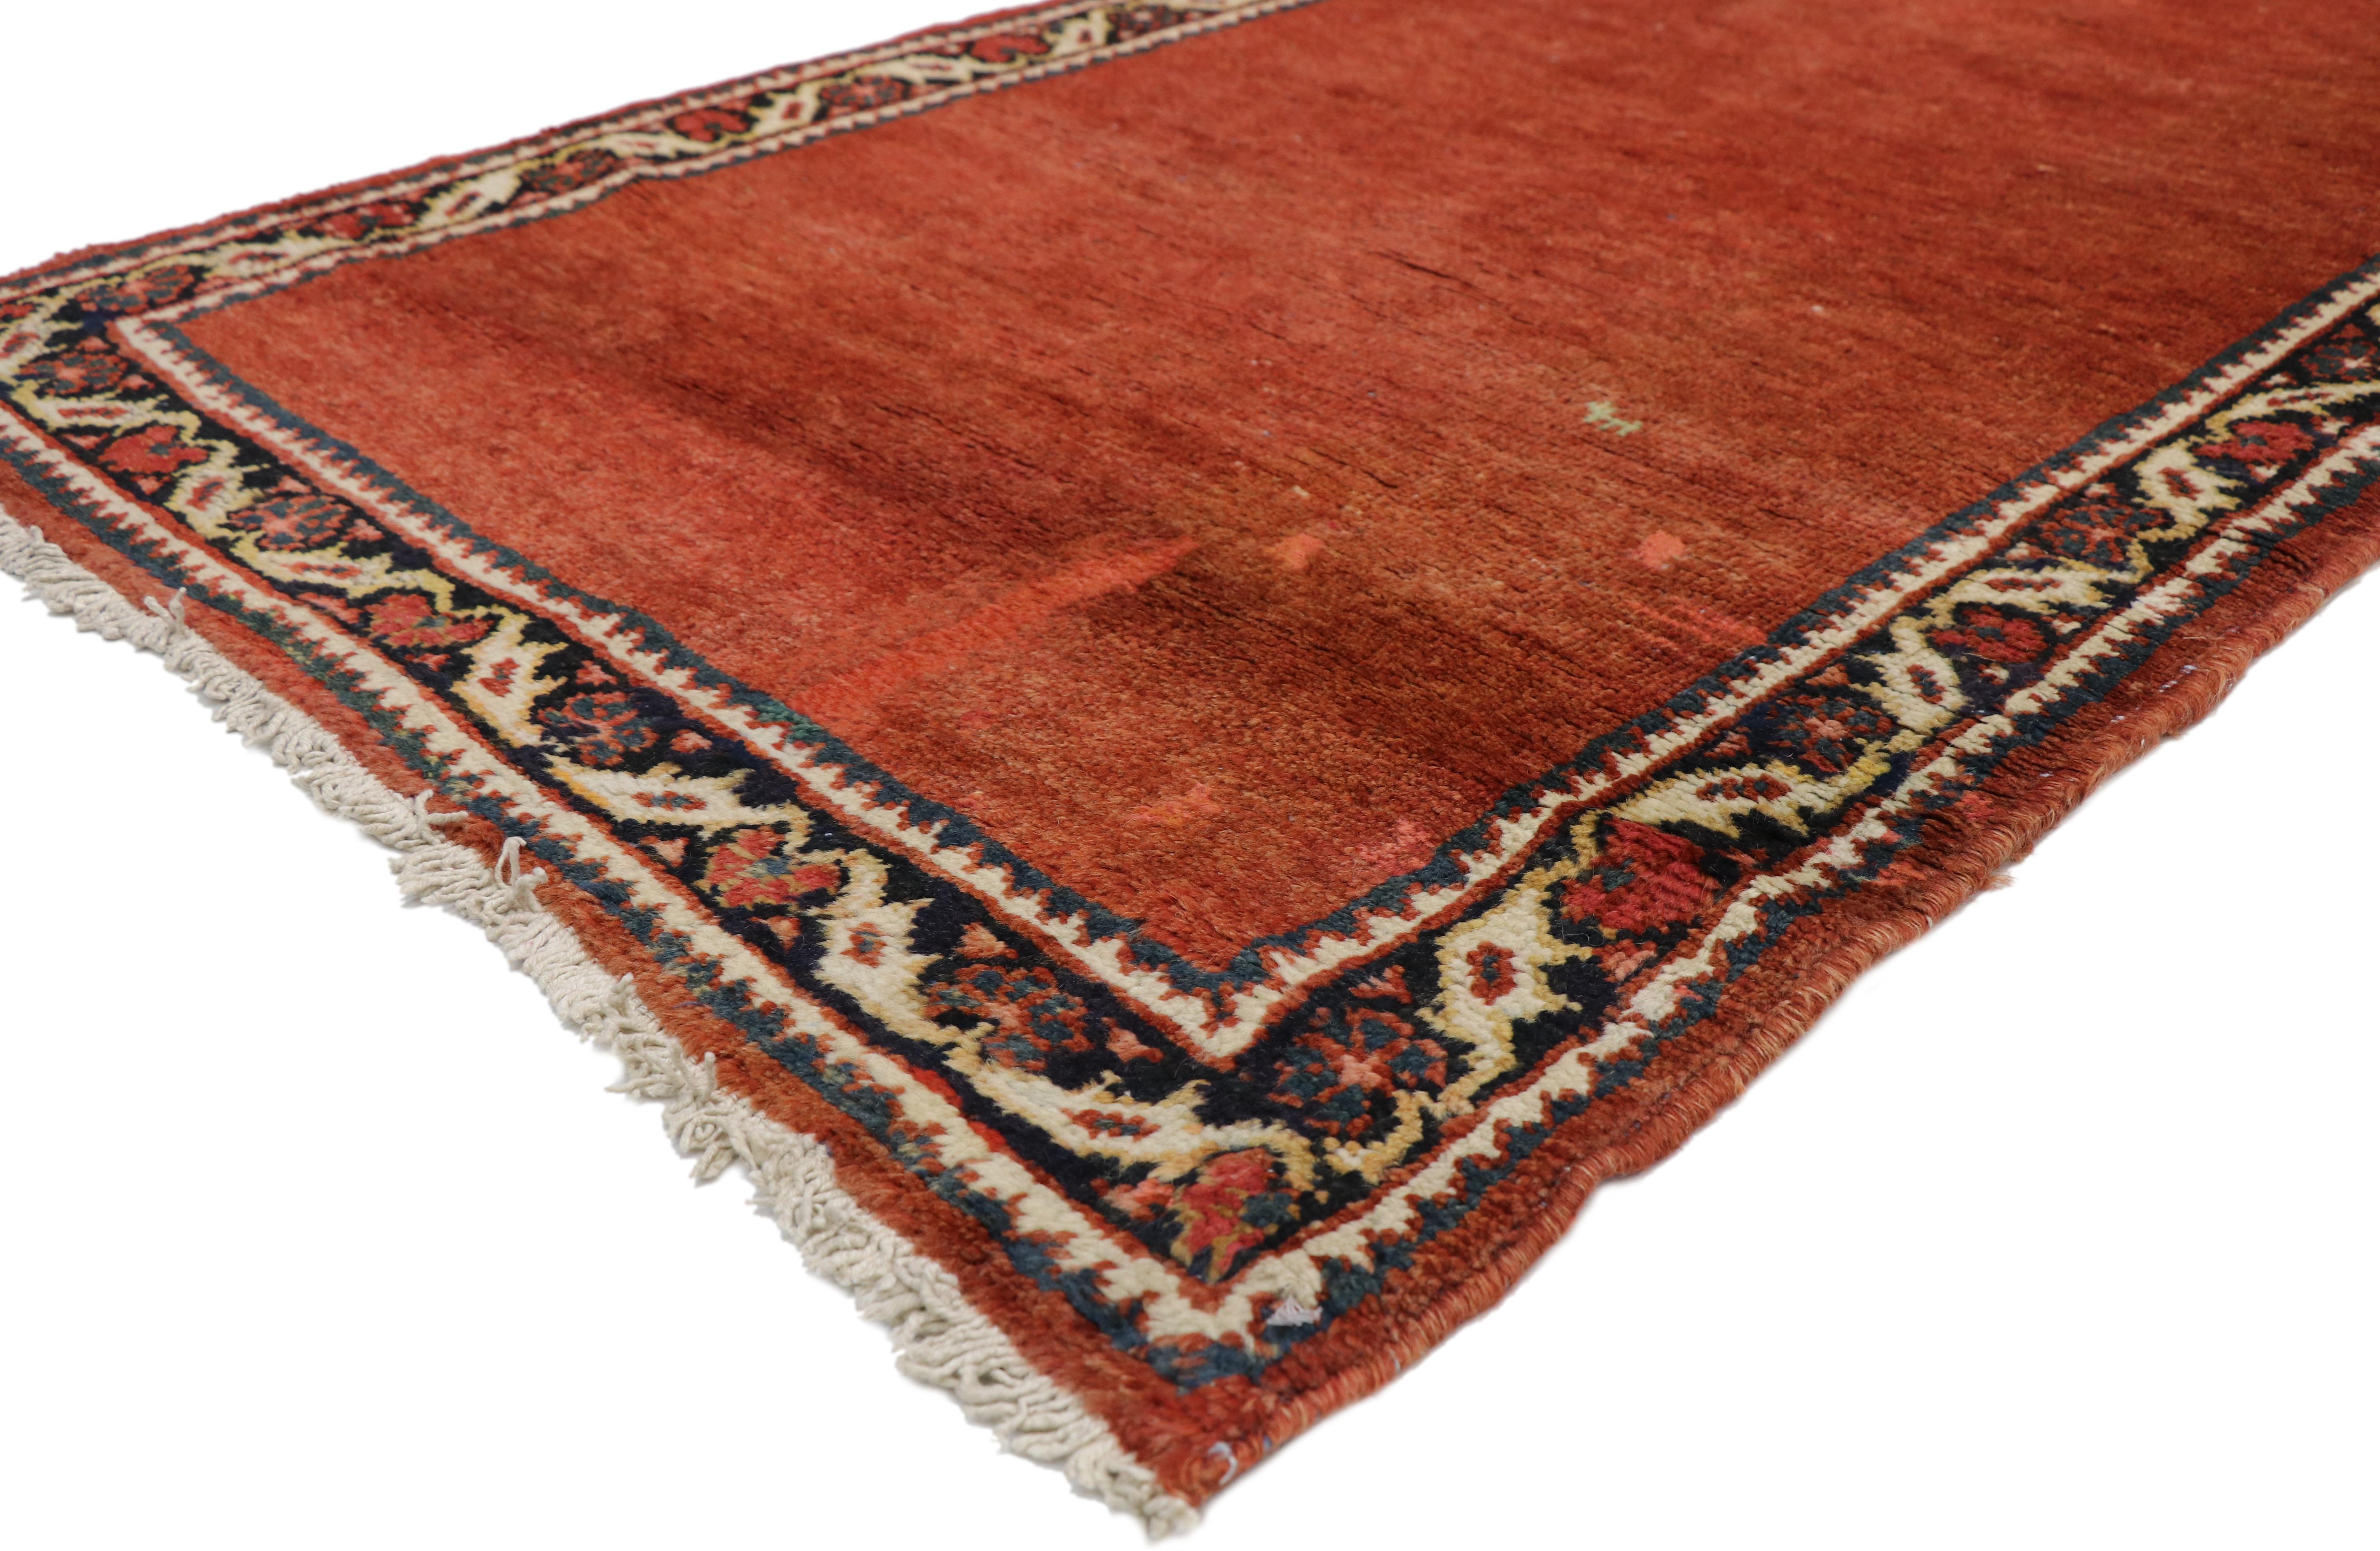 73232, antique Persian Mahal Runner in red with Manor House Tudor style. This incredibly rich antique Persian Mahal carpet runner features a modern traditional style, characterized primarily by the red field and equally impressive border. The bold